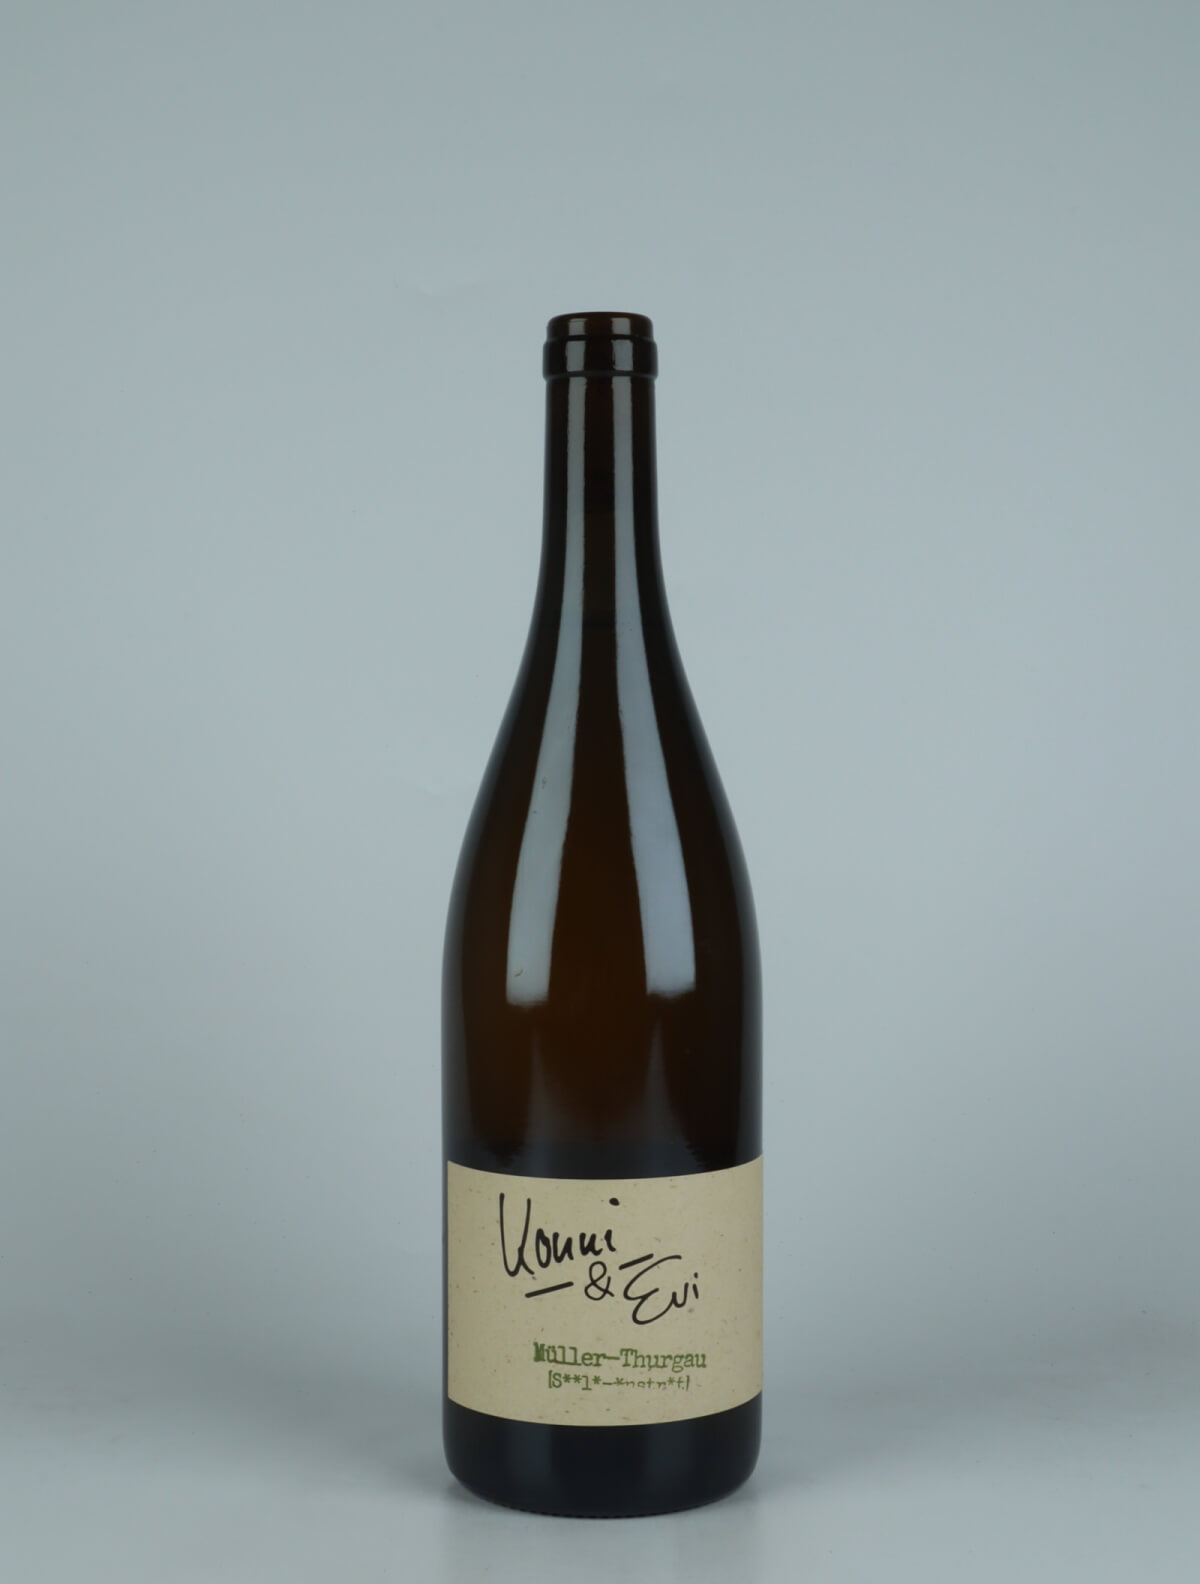 A bottle 2022 Müller-Thurgau White wine from Konni & Evi, Saale-Unstrut in Germany